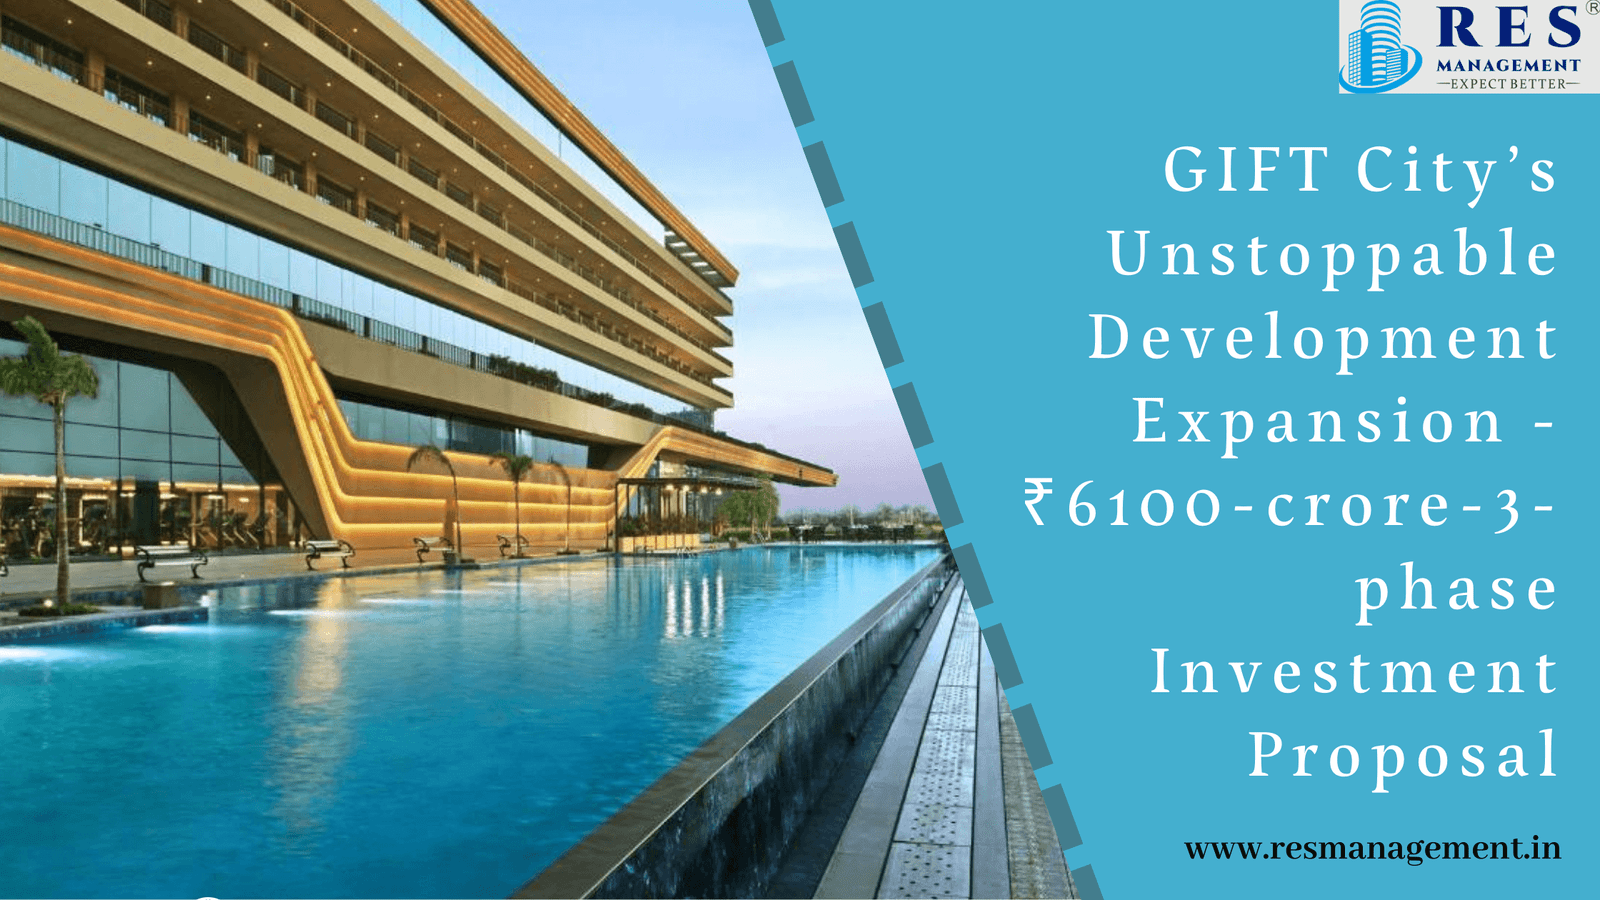 Garg Residency Private Limited - Gift City Remarkable Metamorphosis  Gujarat's International Finance Tec-City is undergoing a remarkable  transformation, reshaping the real estate landscape. This sheds light on  the prominent features and appeal